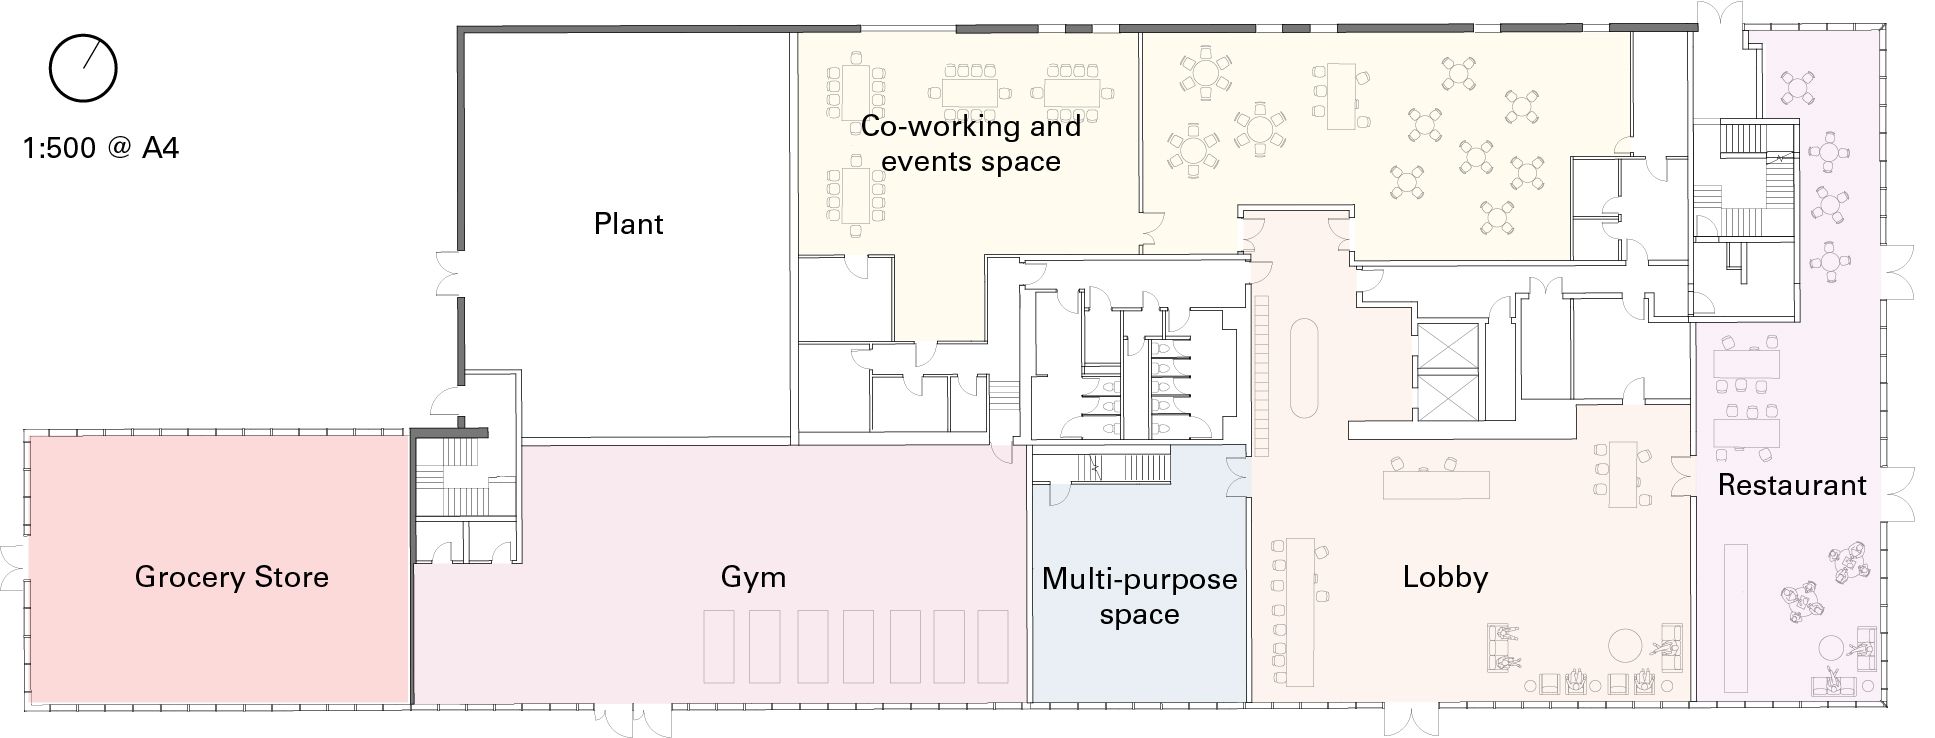 An architectural floorplan showing ground space uses including a grocery store, plant, gym, multi-purpose space, lobby, restaurant and co-working and events space